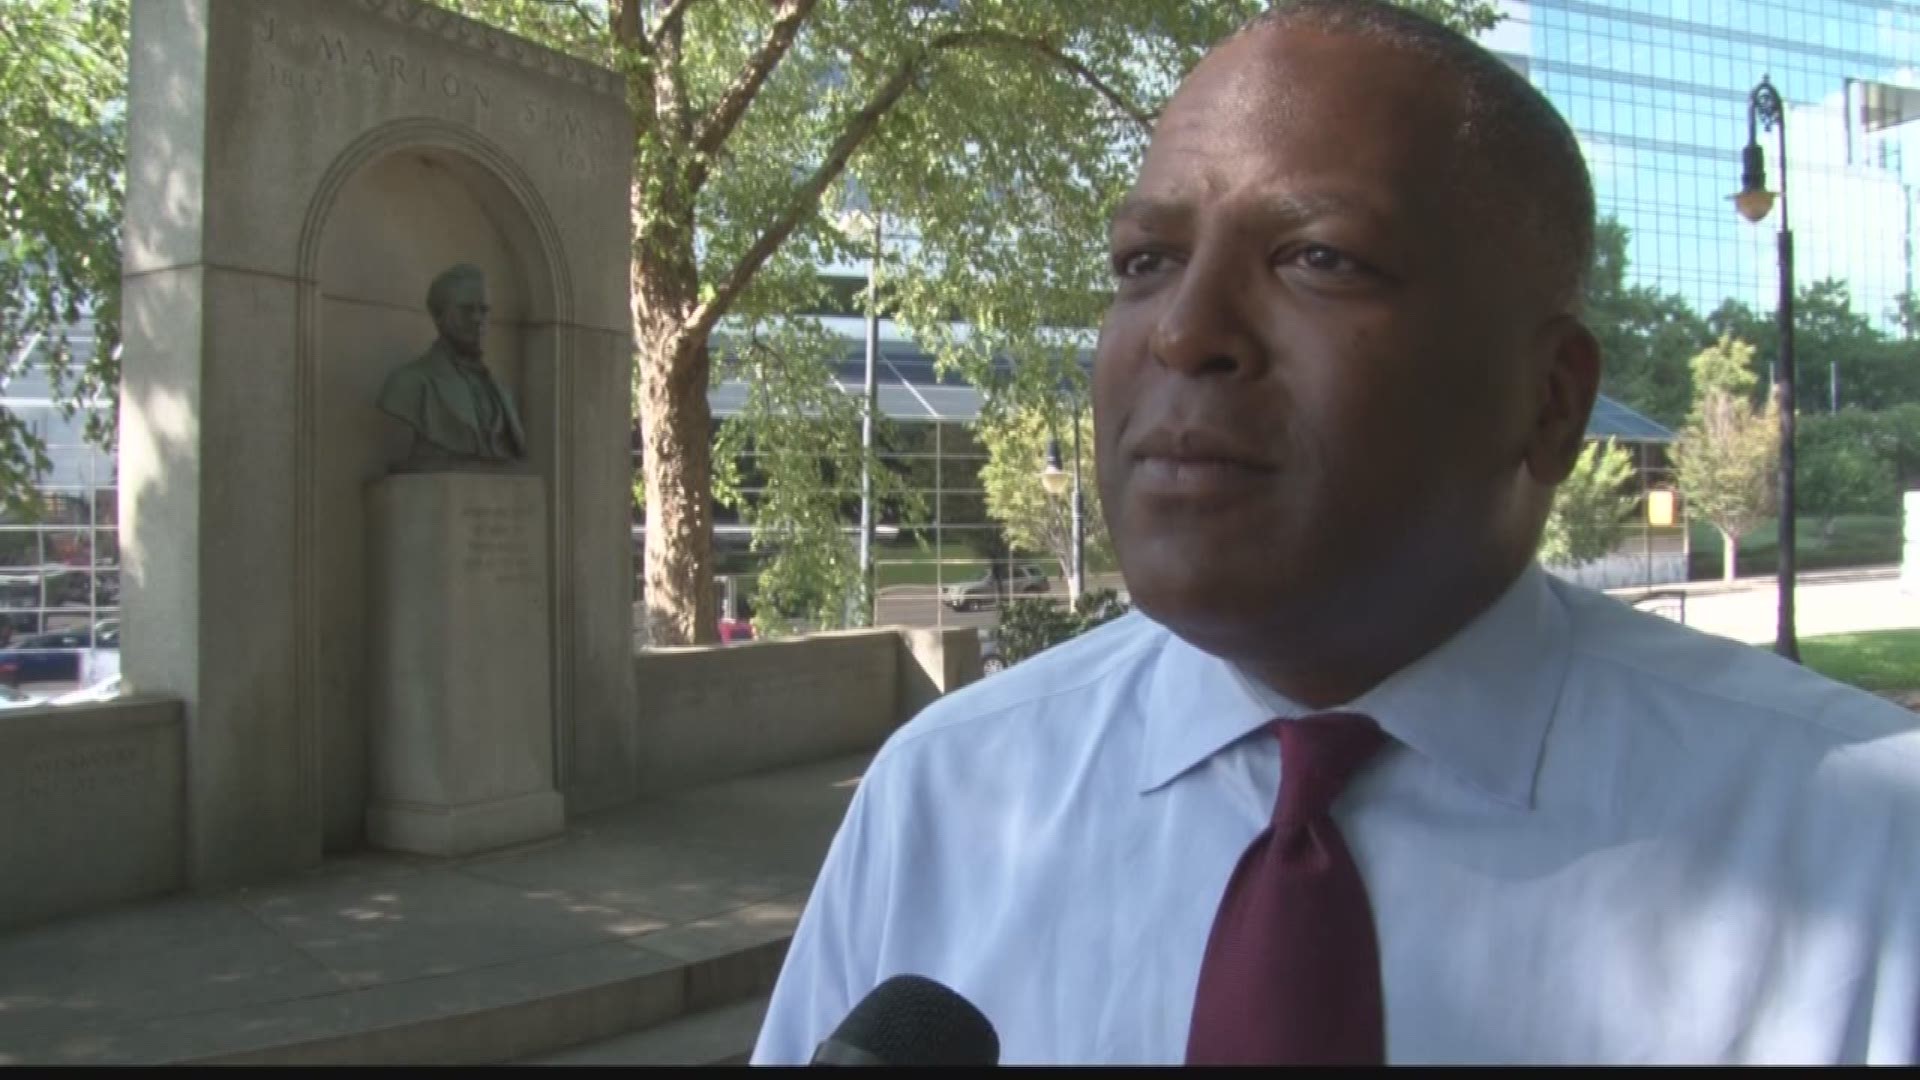 Sen. Todd Rutherford plans to introduce a bill to make it easier to remove statues from the State House. Columbia Mayor Steve Benjamin wants the J. Marion Sims monument to come down.